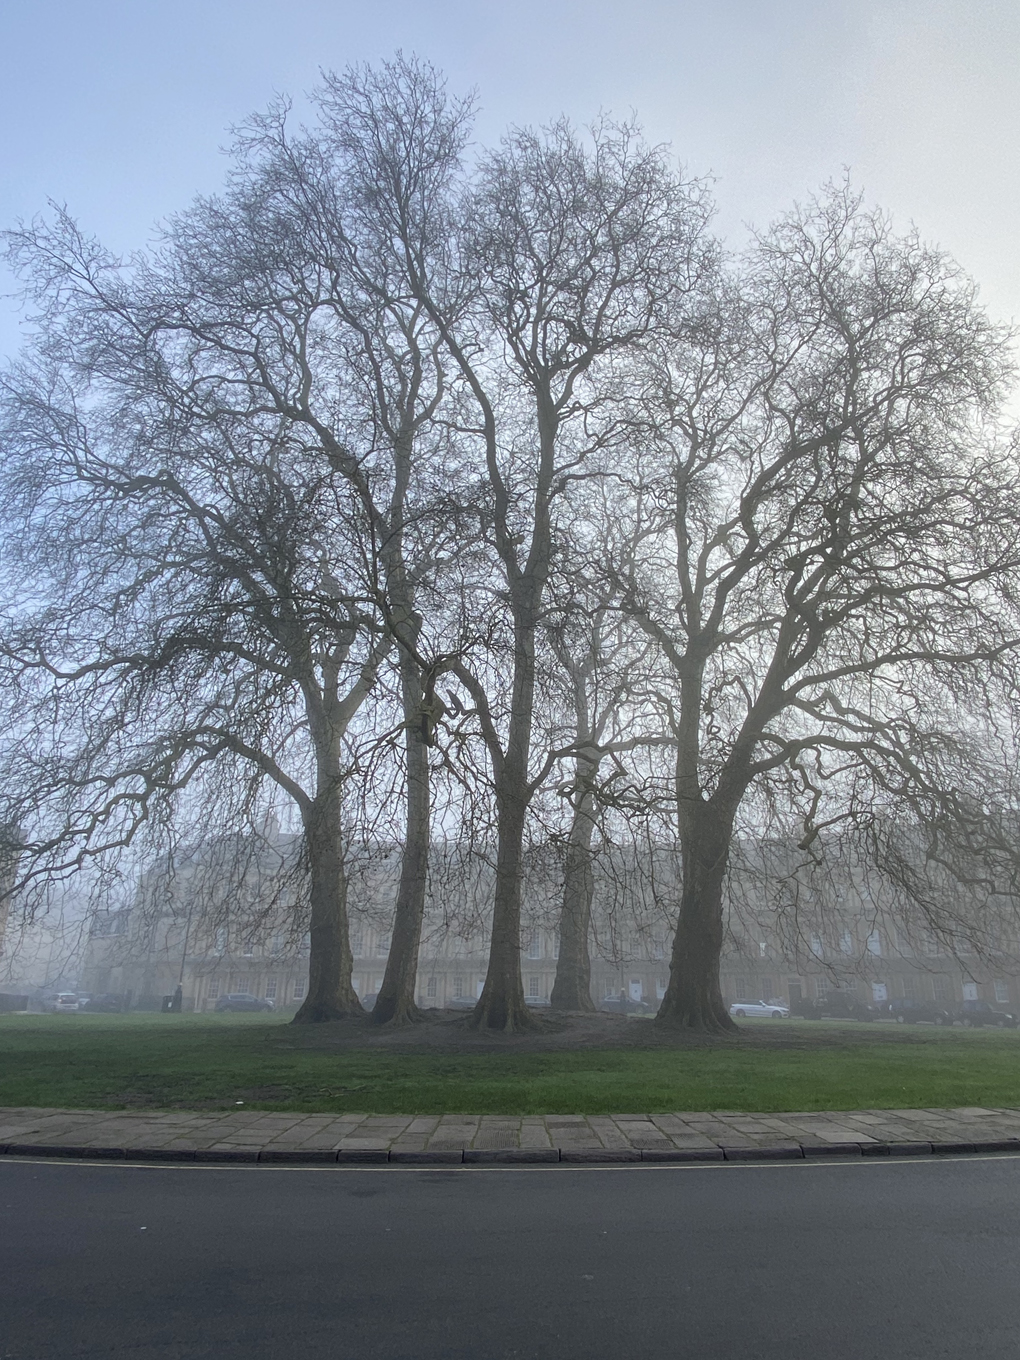 Five large trees without leaves, looming through the fog